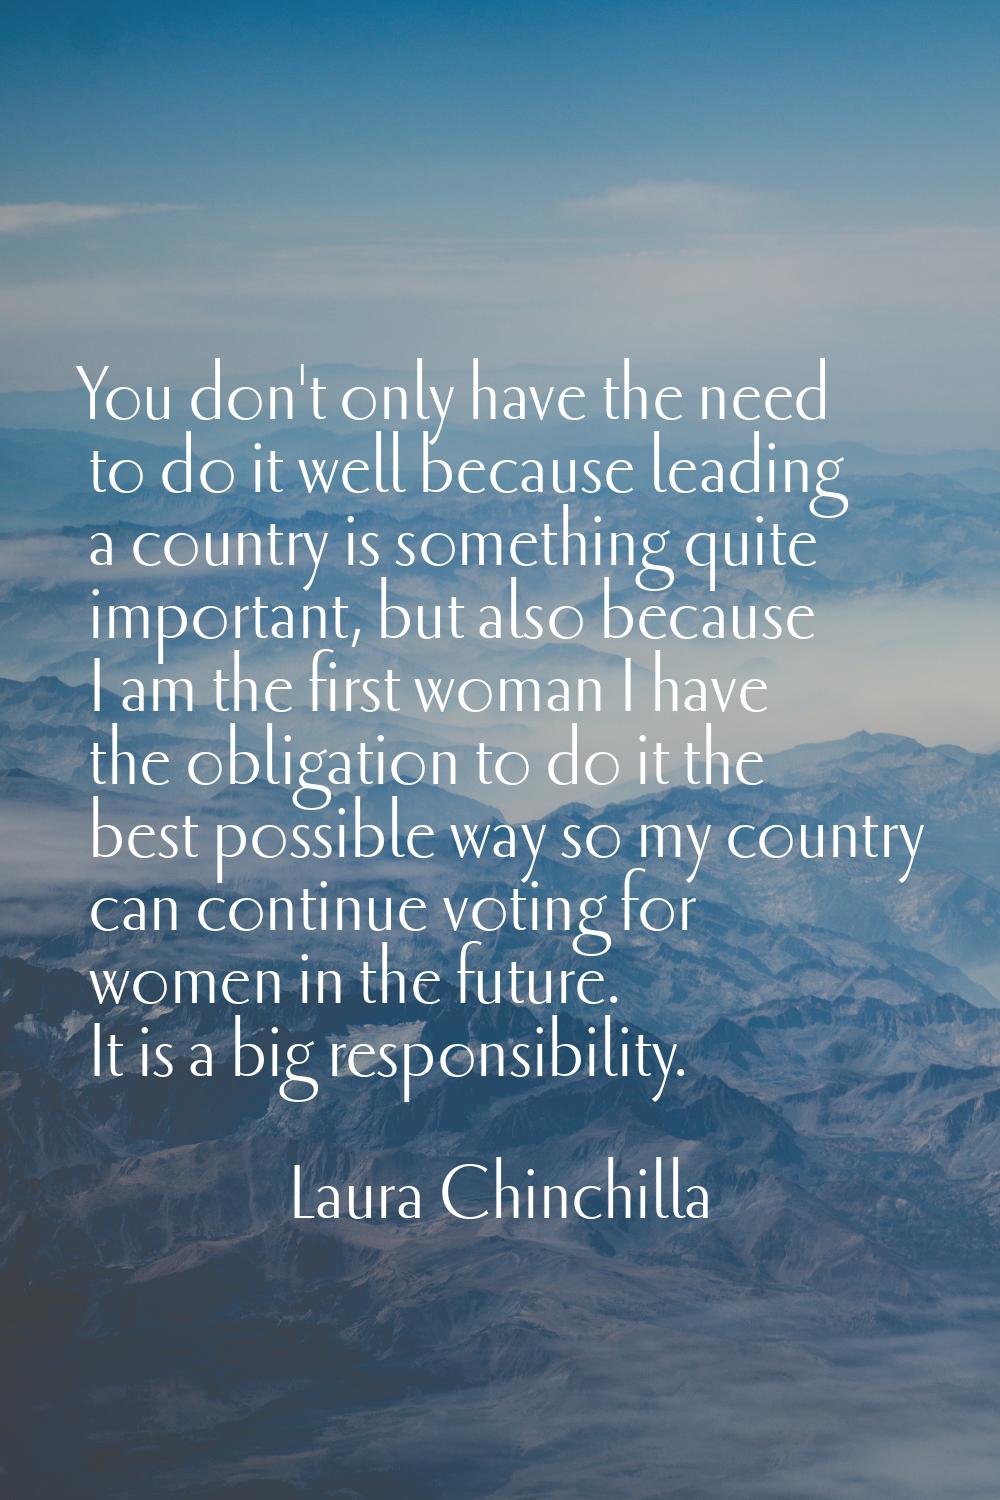 You don't only have the need to do it well because leading a country is something quite important, 